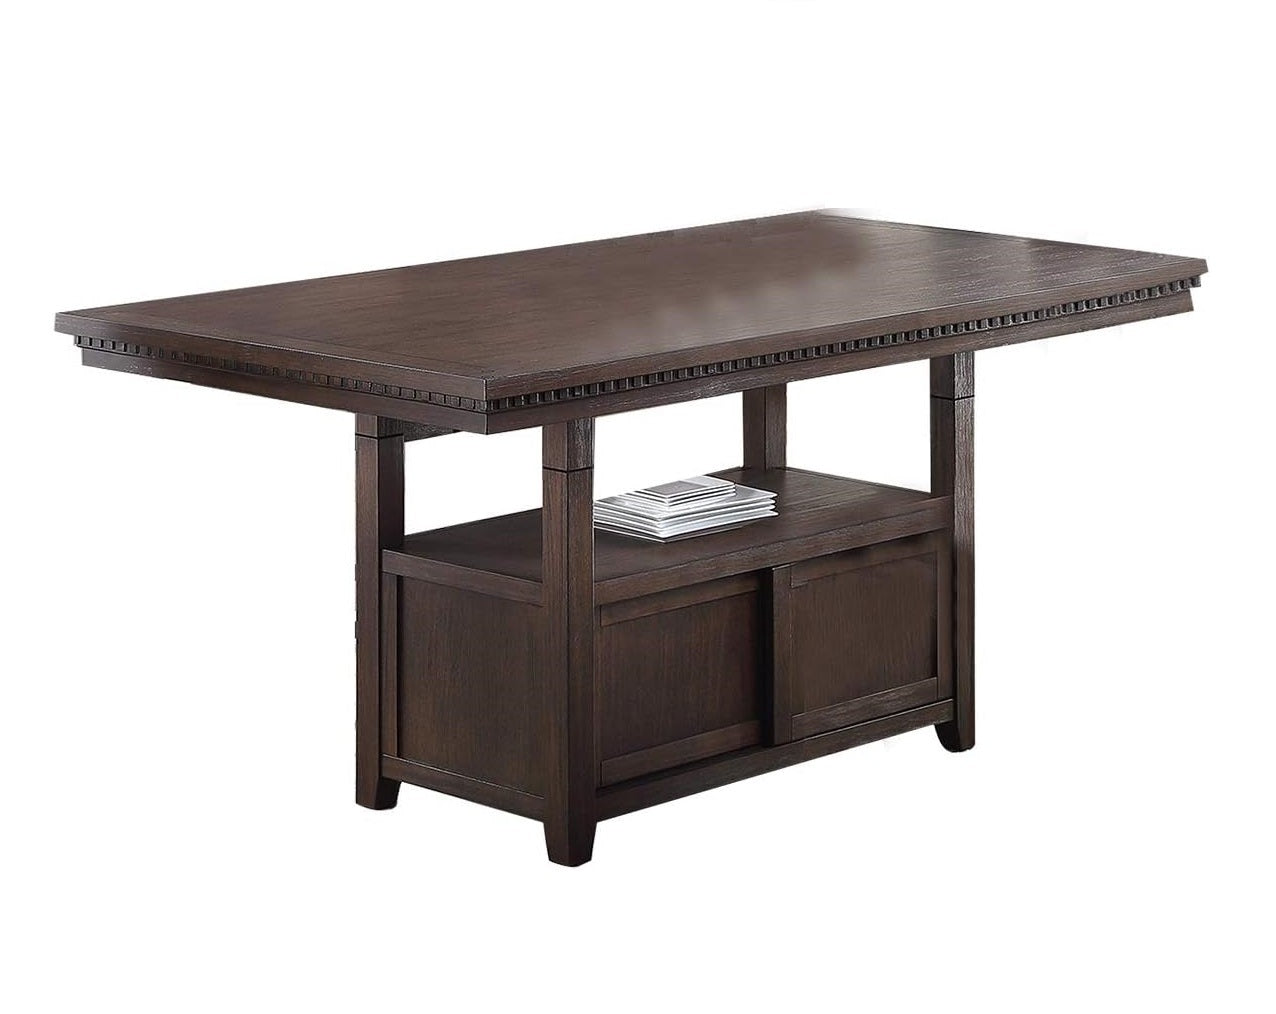 Dining Room Furniture Rustic Espresso Counter Height espresso-wood-dining room-solid